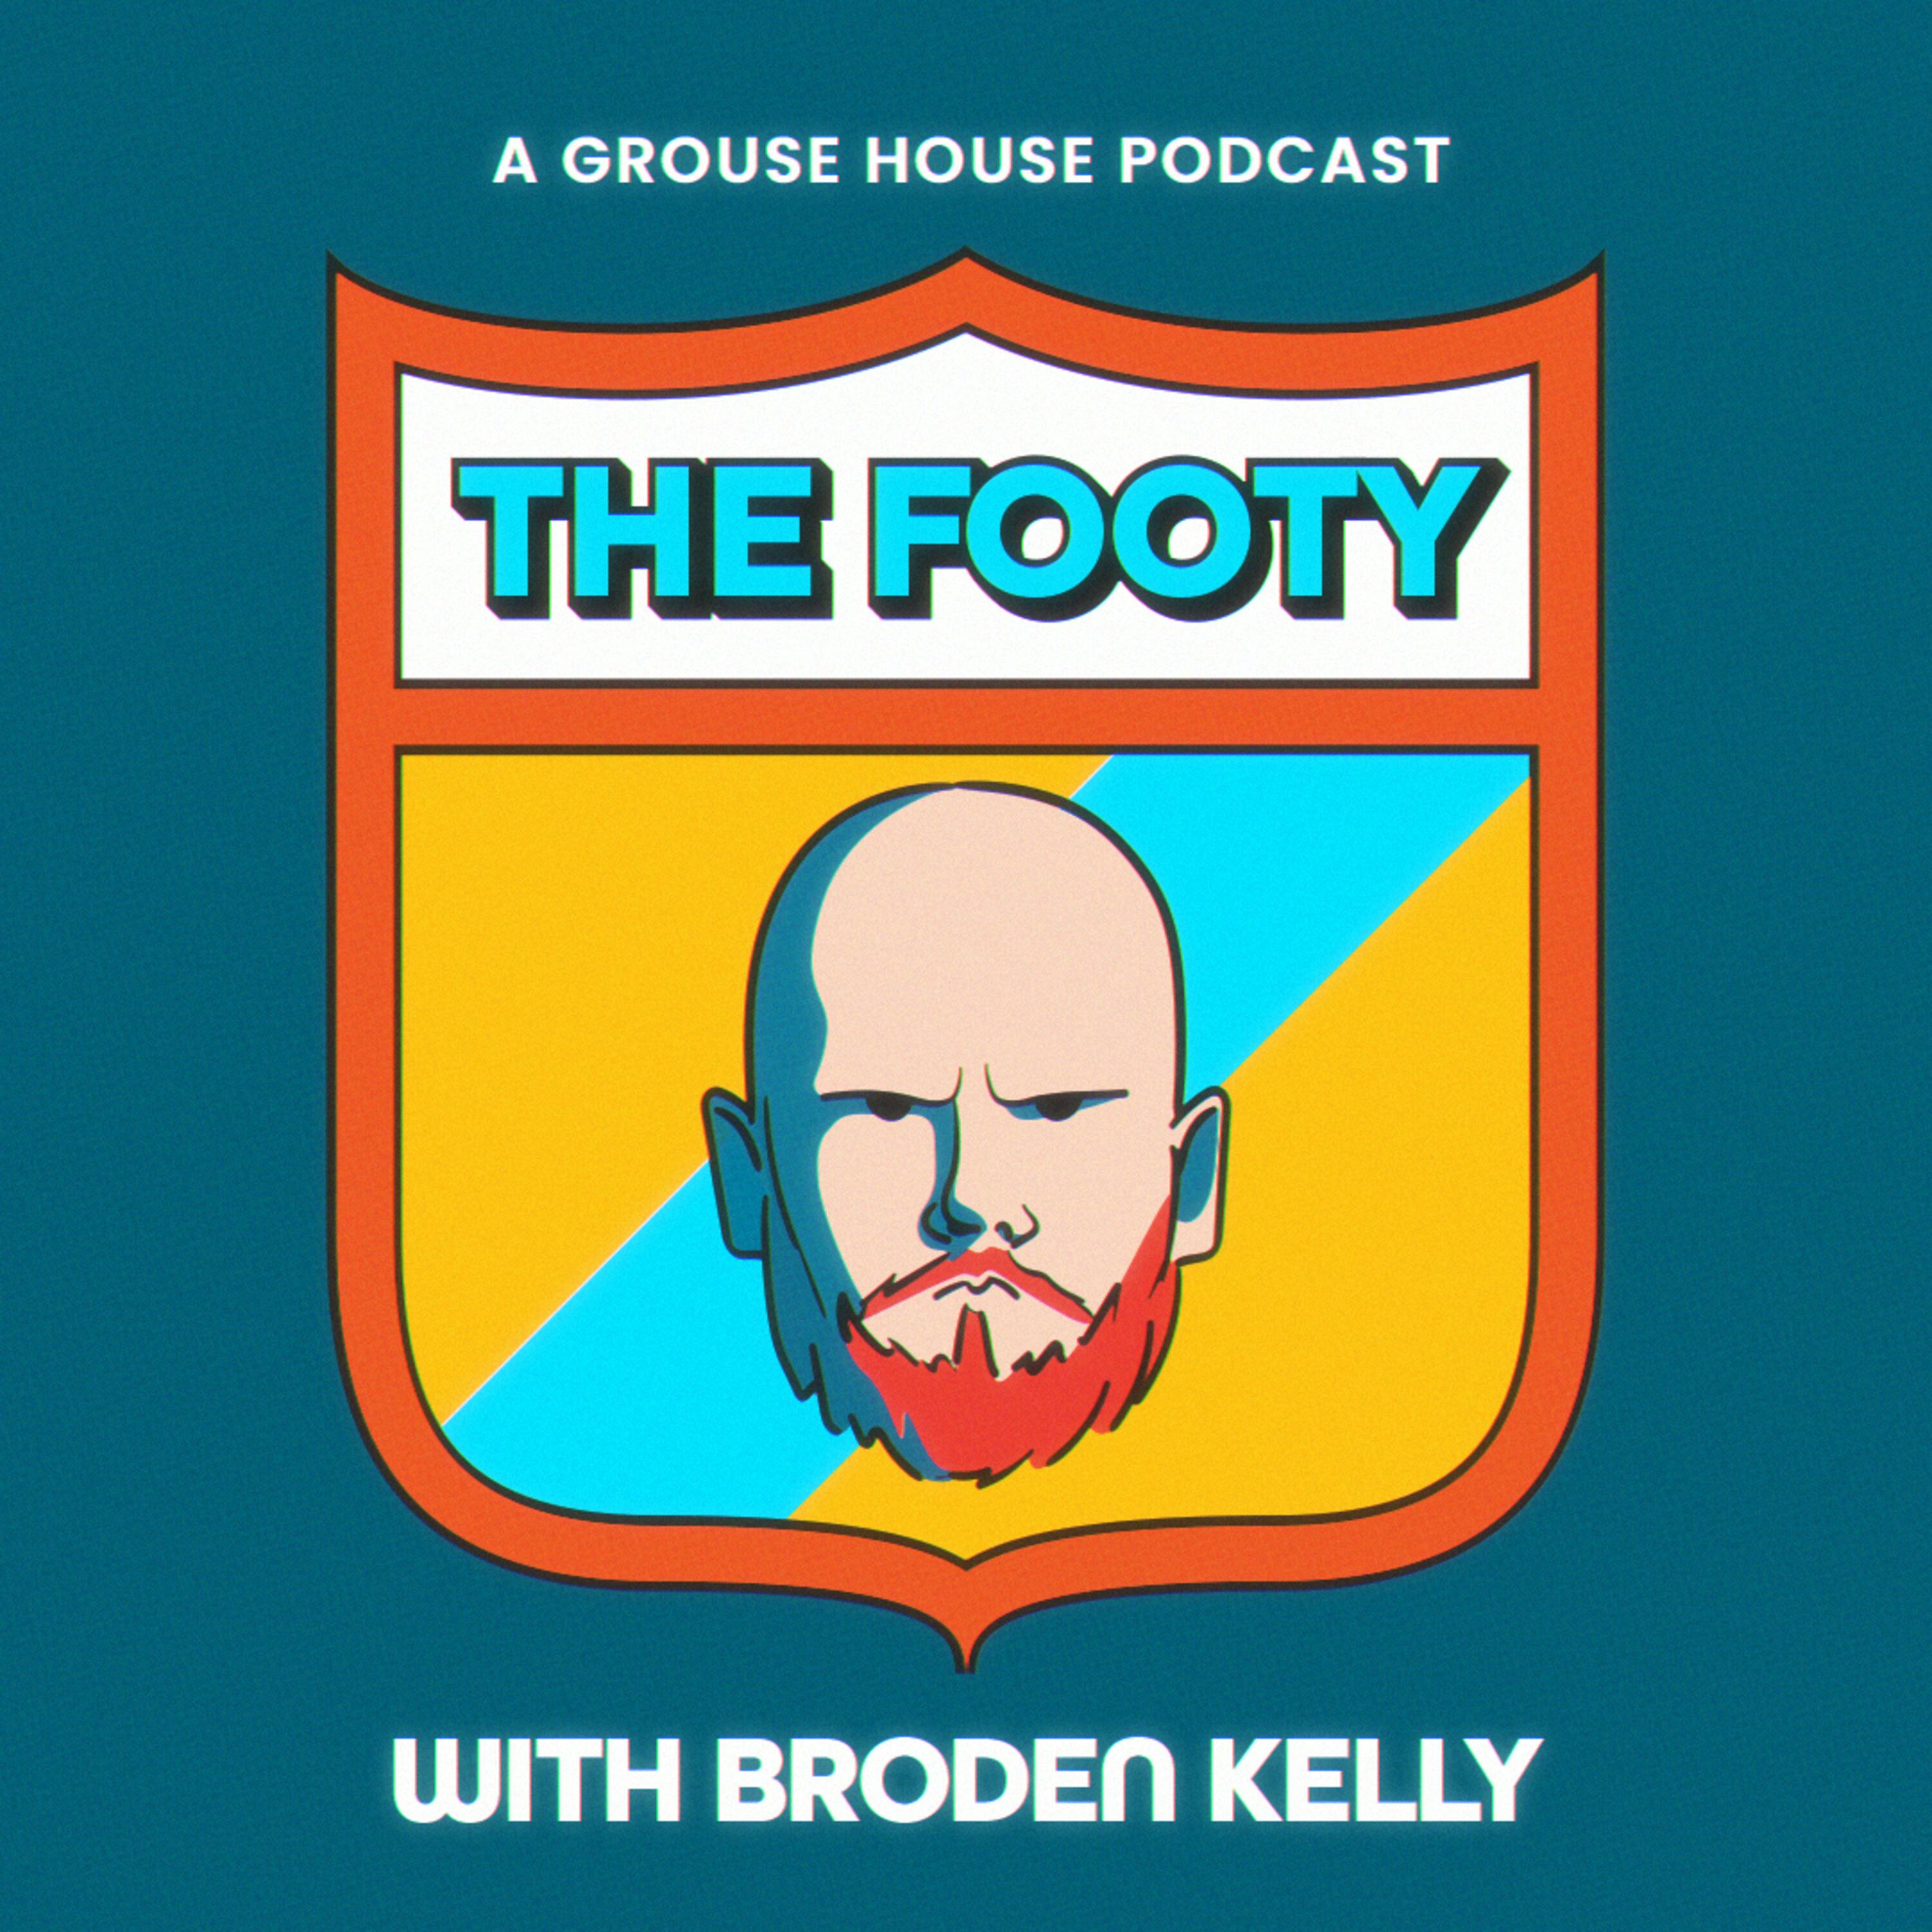 AFLW GRAND FINAL PREVIEW, Quiz Meisters, Broccoli and Snacks.